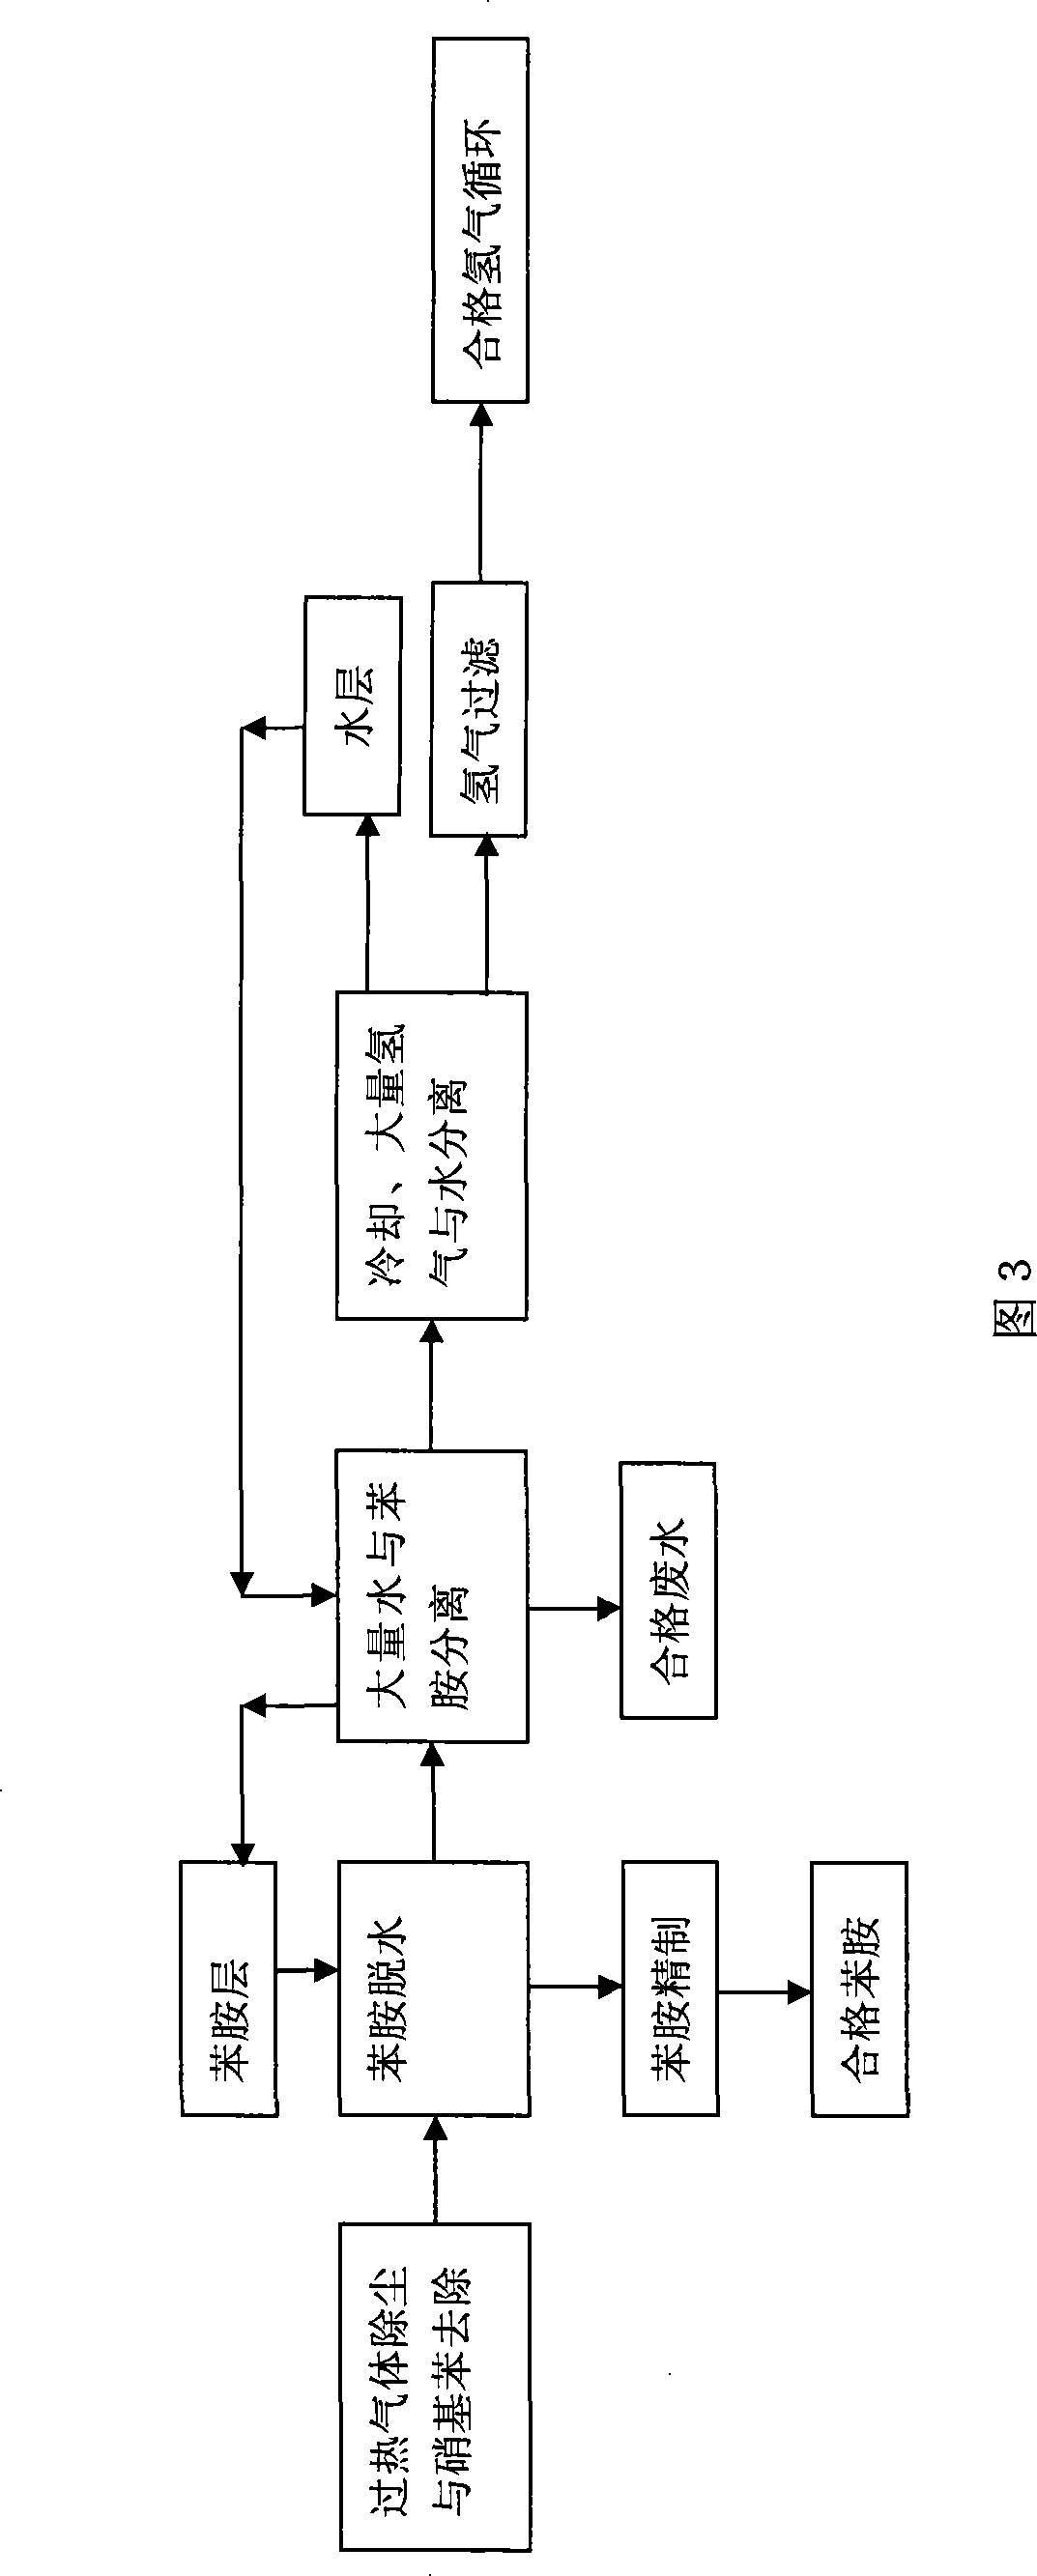 Aniline post processing system and method